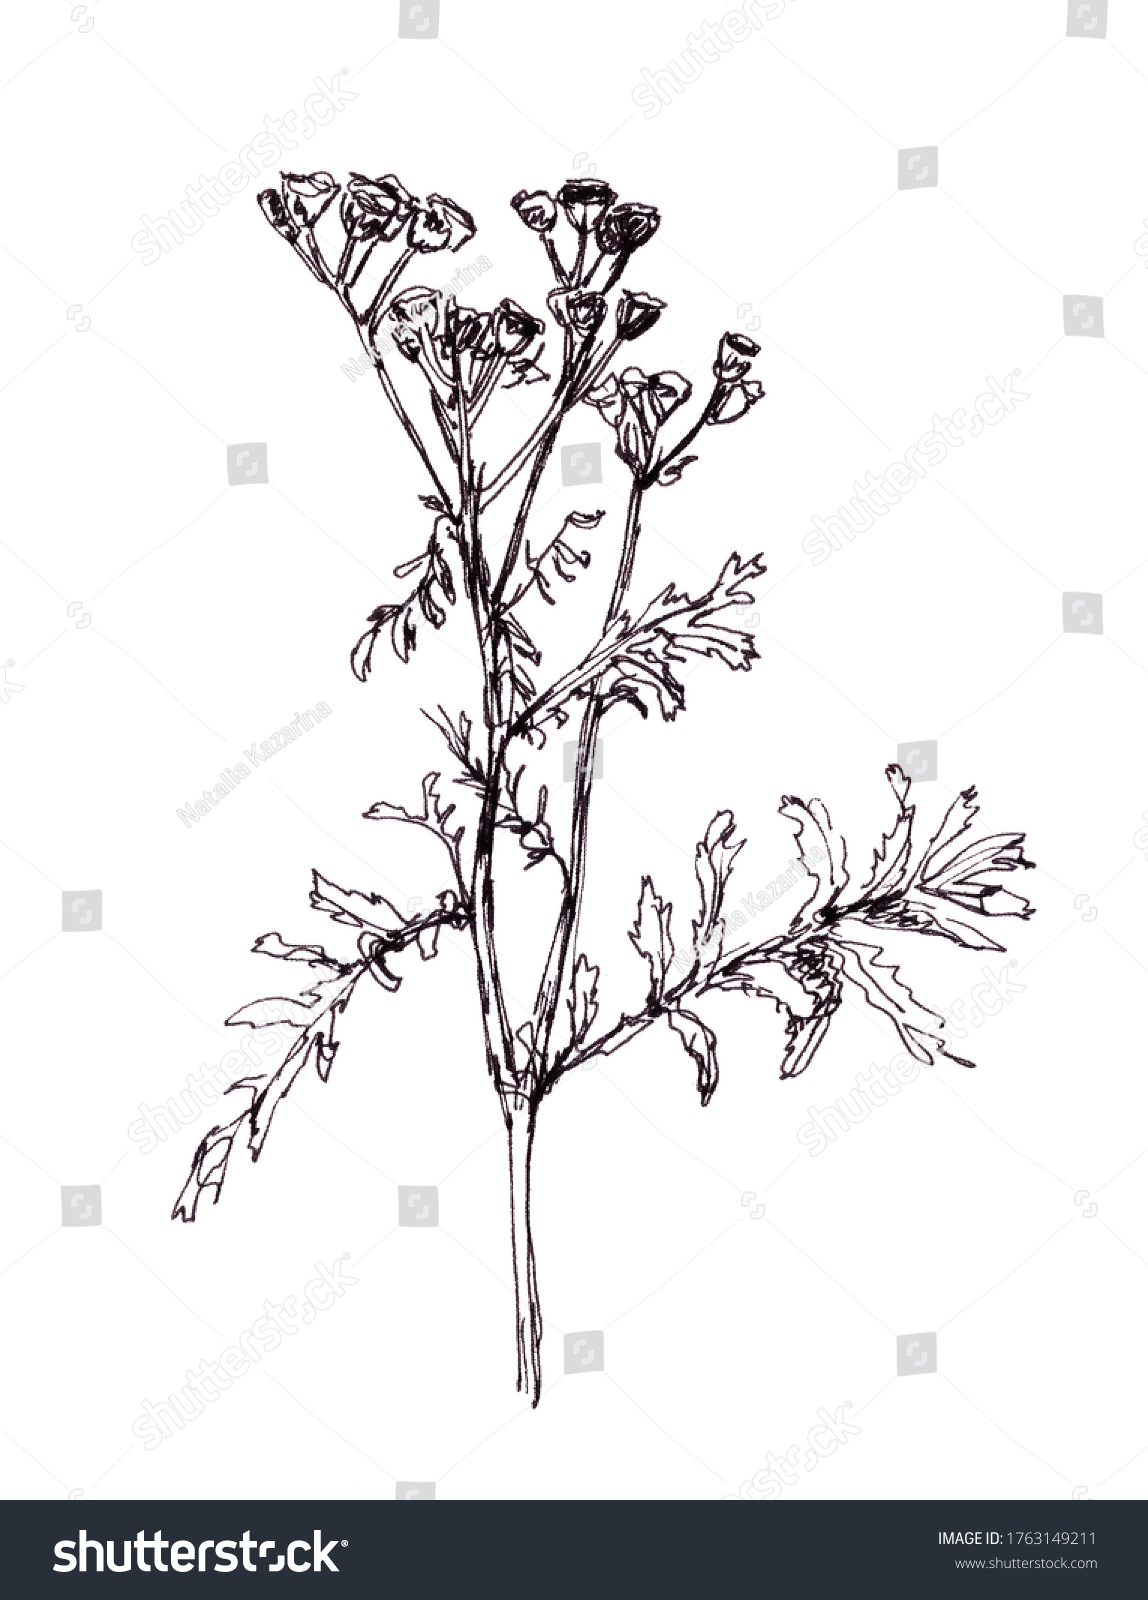 Sprig Tansy Flowers Leaves Graphic Black Stock Illustration 1763149211